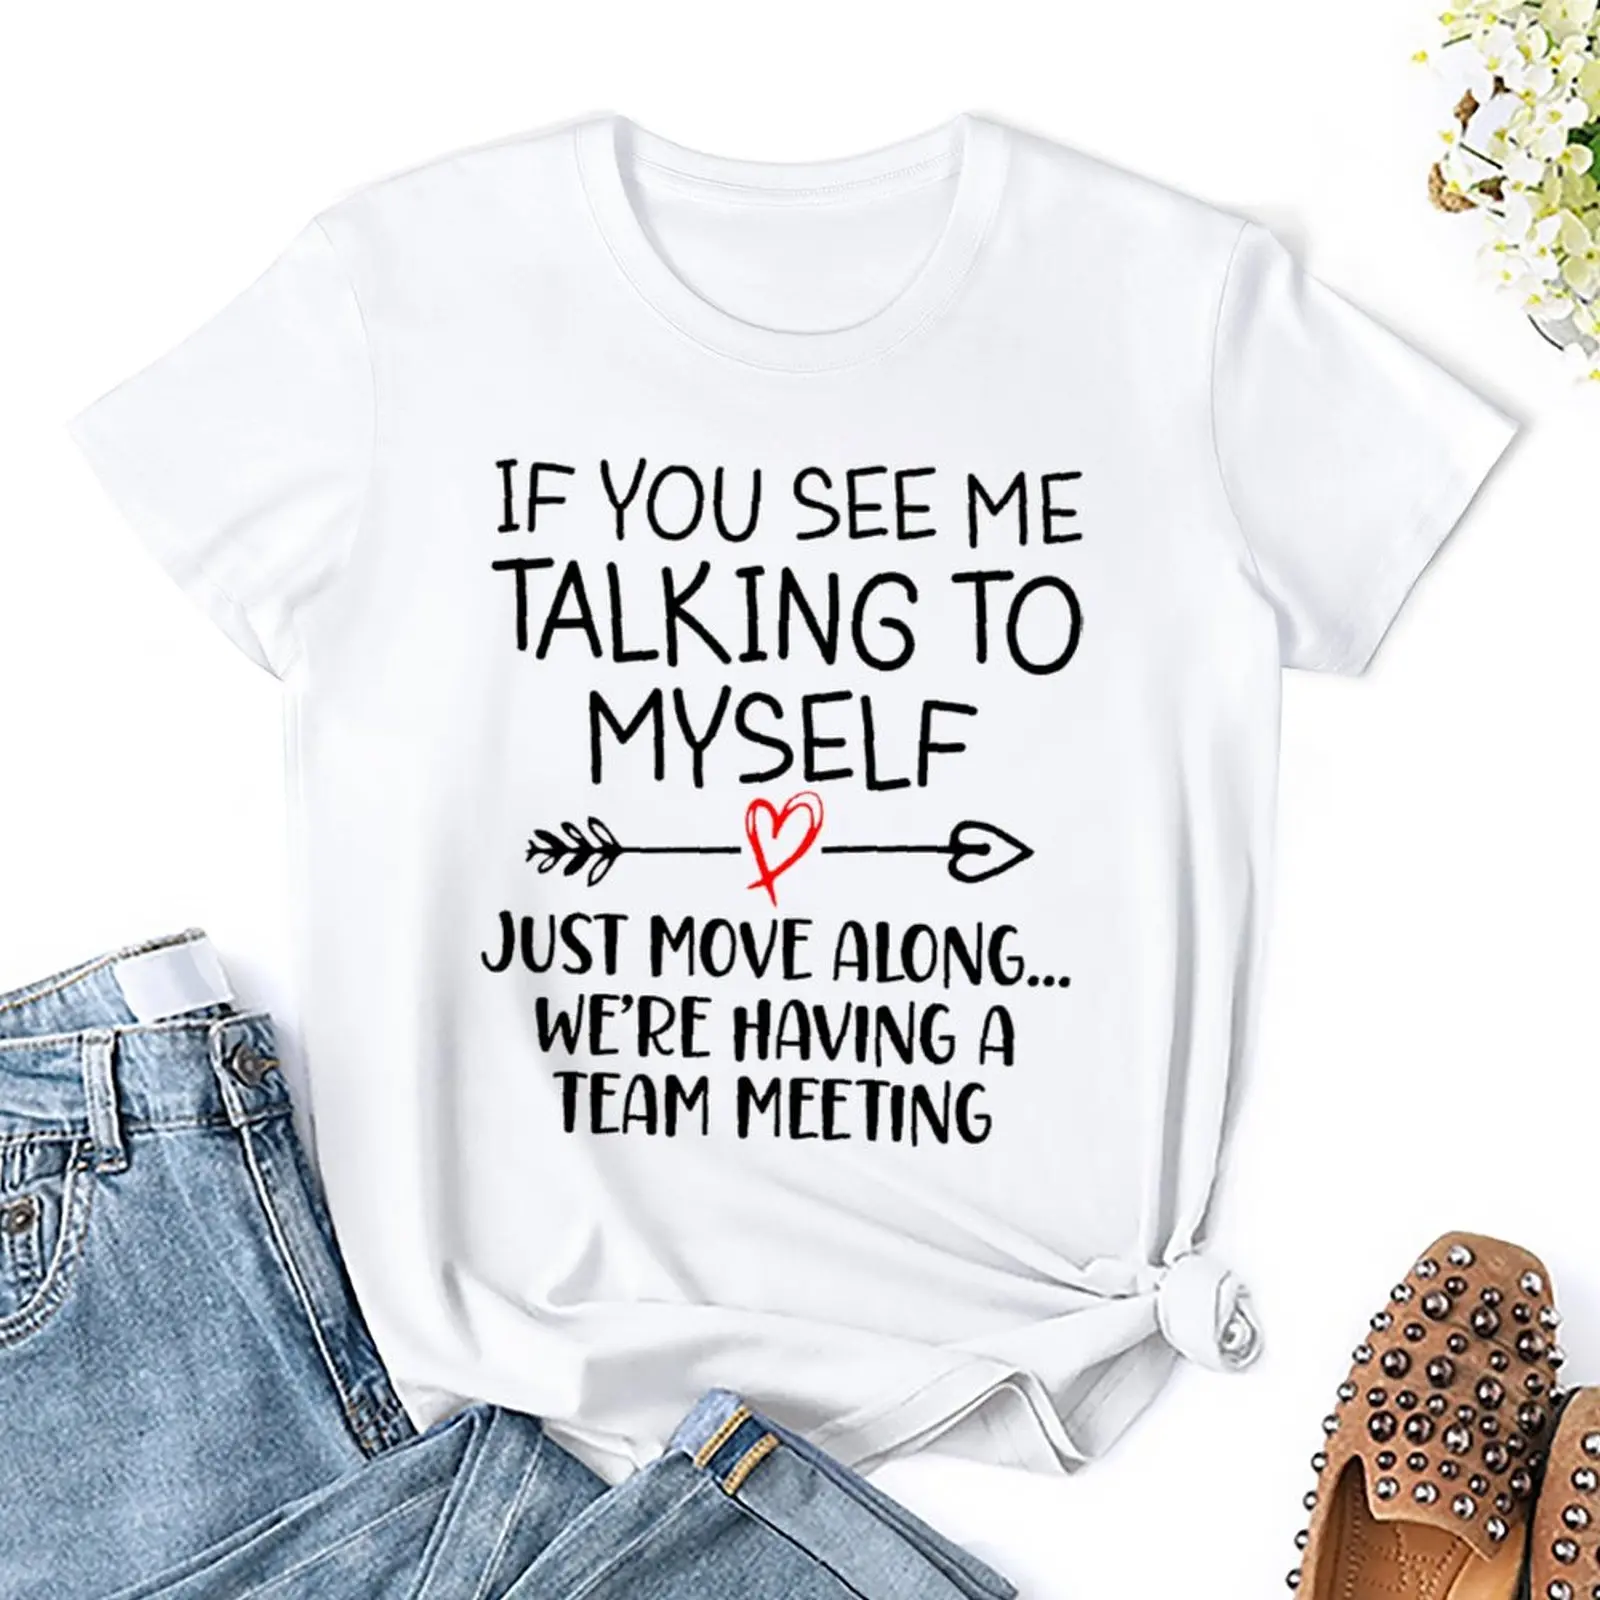 

If You See Me Talking To Myself Just Move Along 13 100% Cotton Movement Cute High Quality Activity Competition T-shirts USA Siz